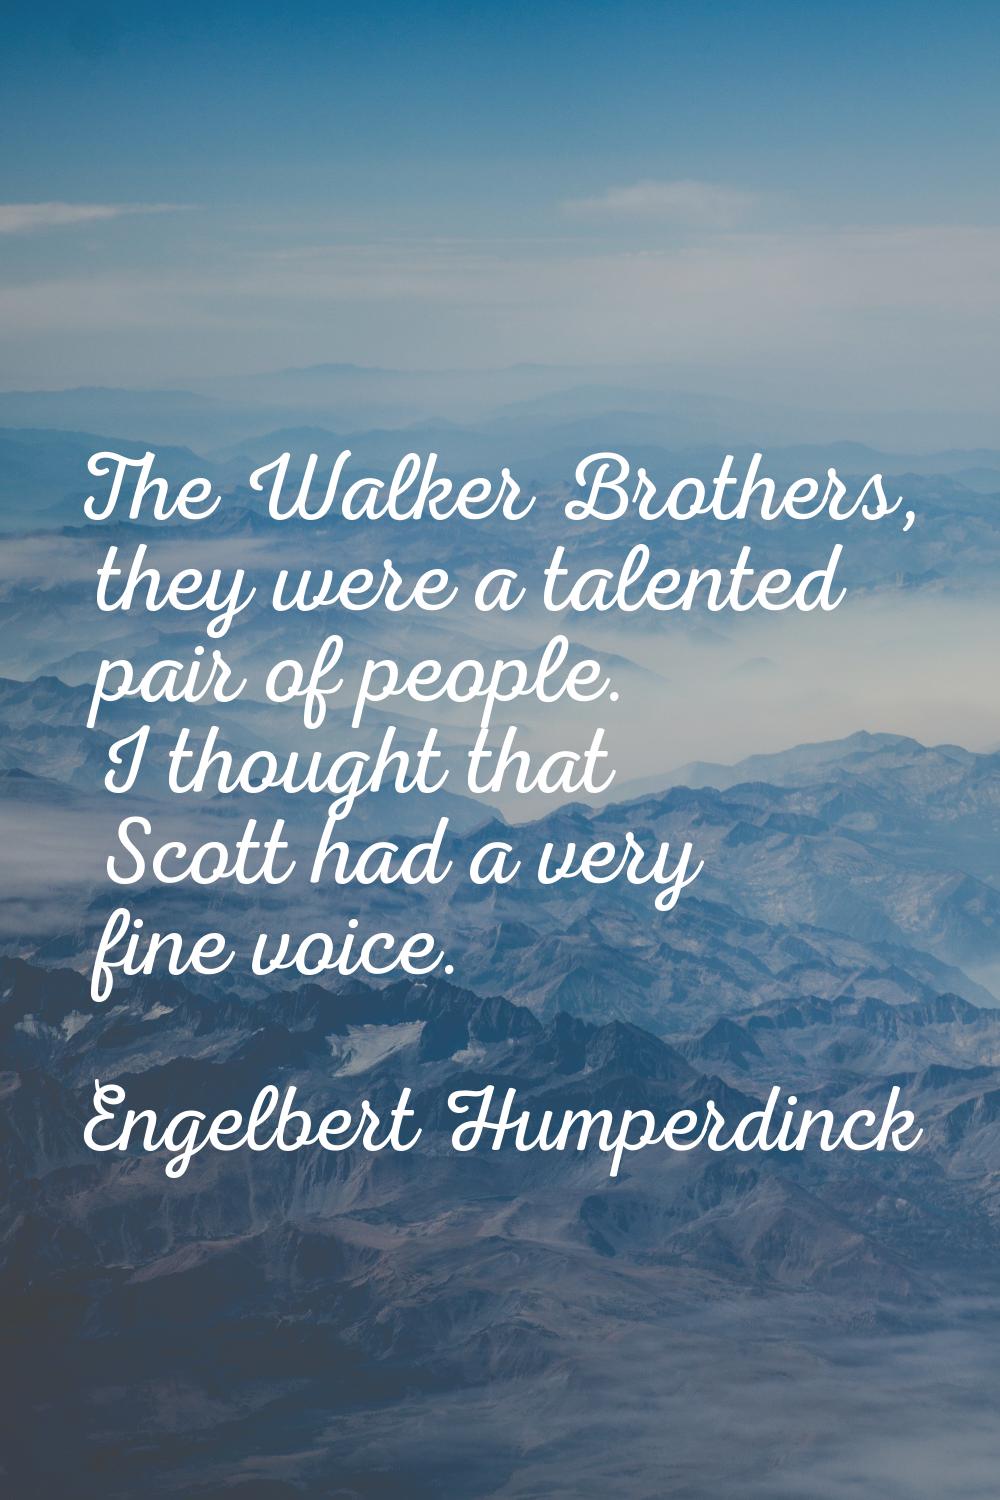 The Walker Brothers, they were a talented pair of people. I thought that Scott had a very fine voic